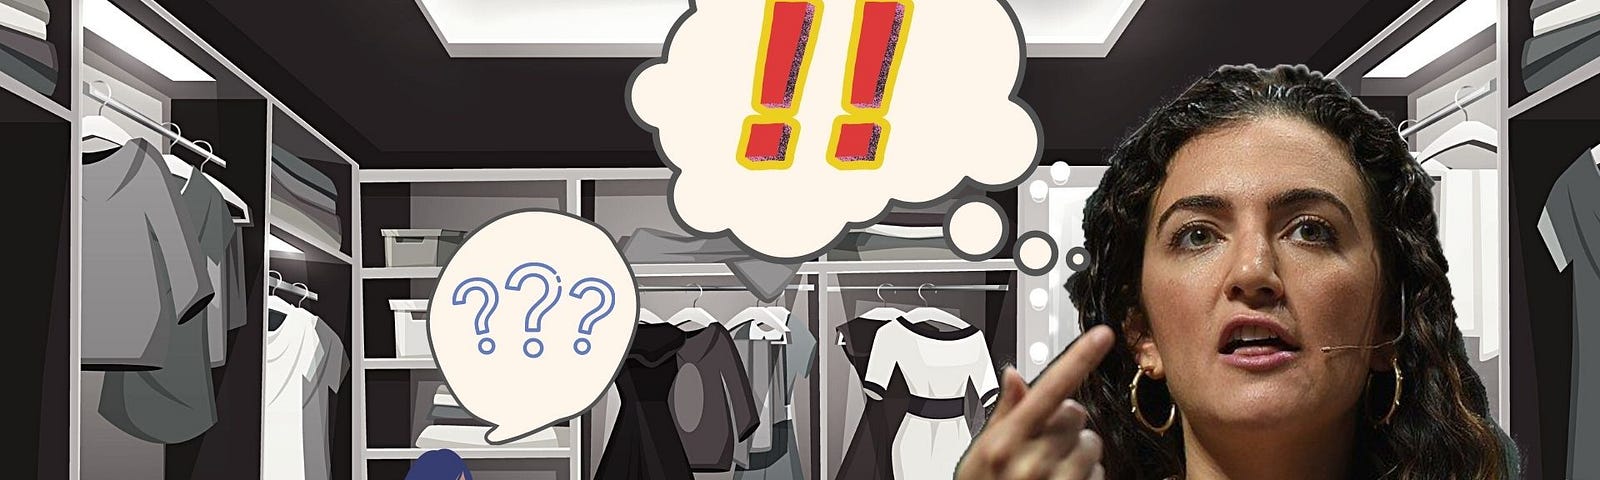 Illustration of woman kneeling in her closet with question marks over her head, accompanied by photo of Jennifer Hyman with exclamation marks in her thought bubble.